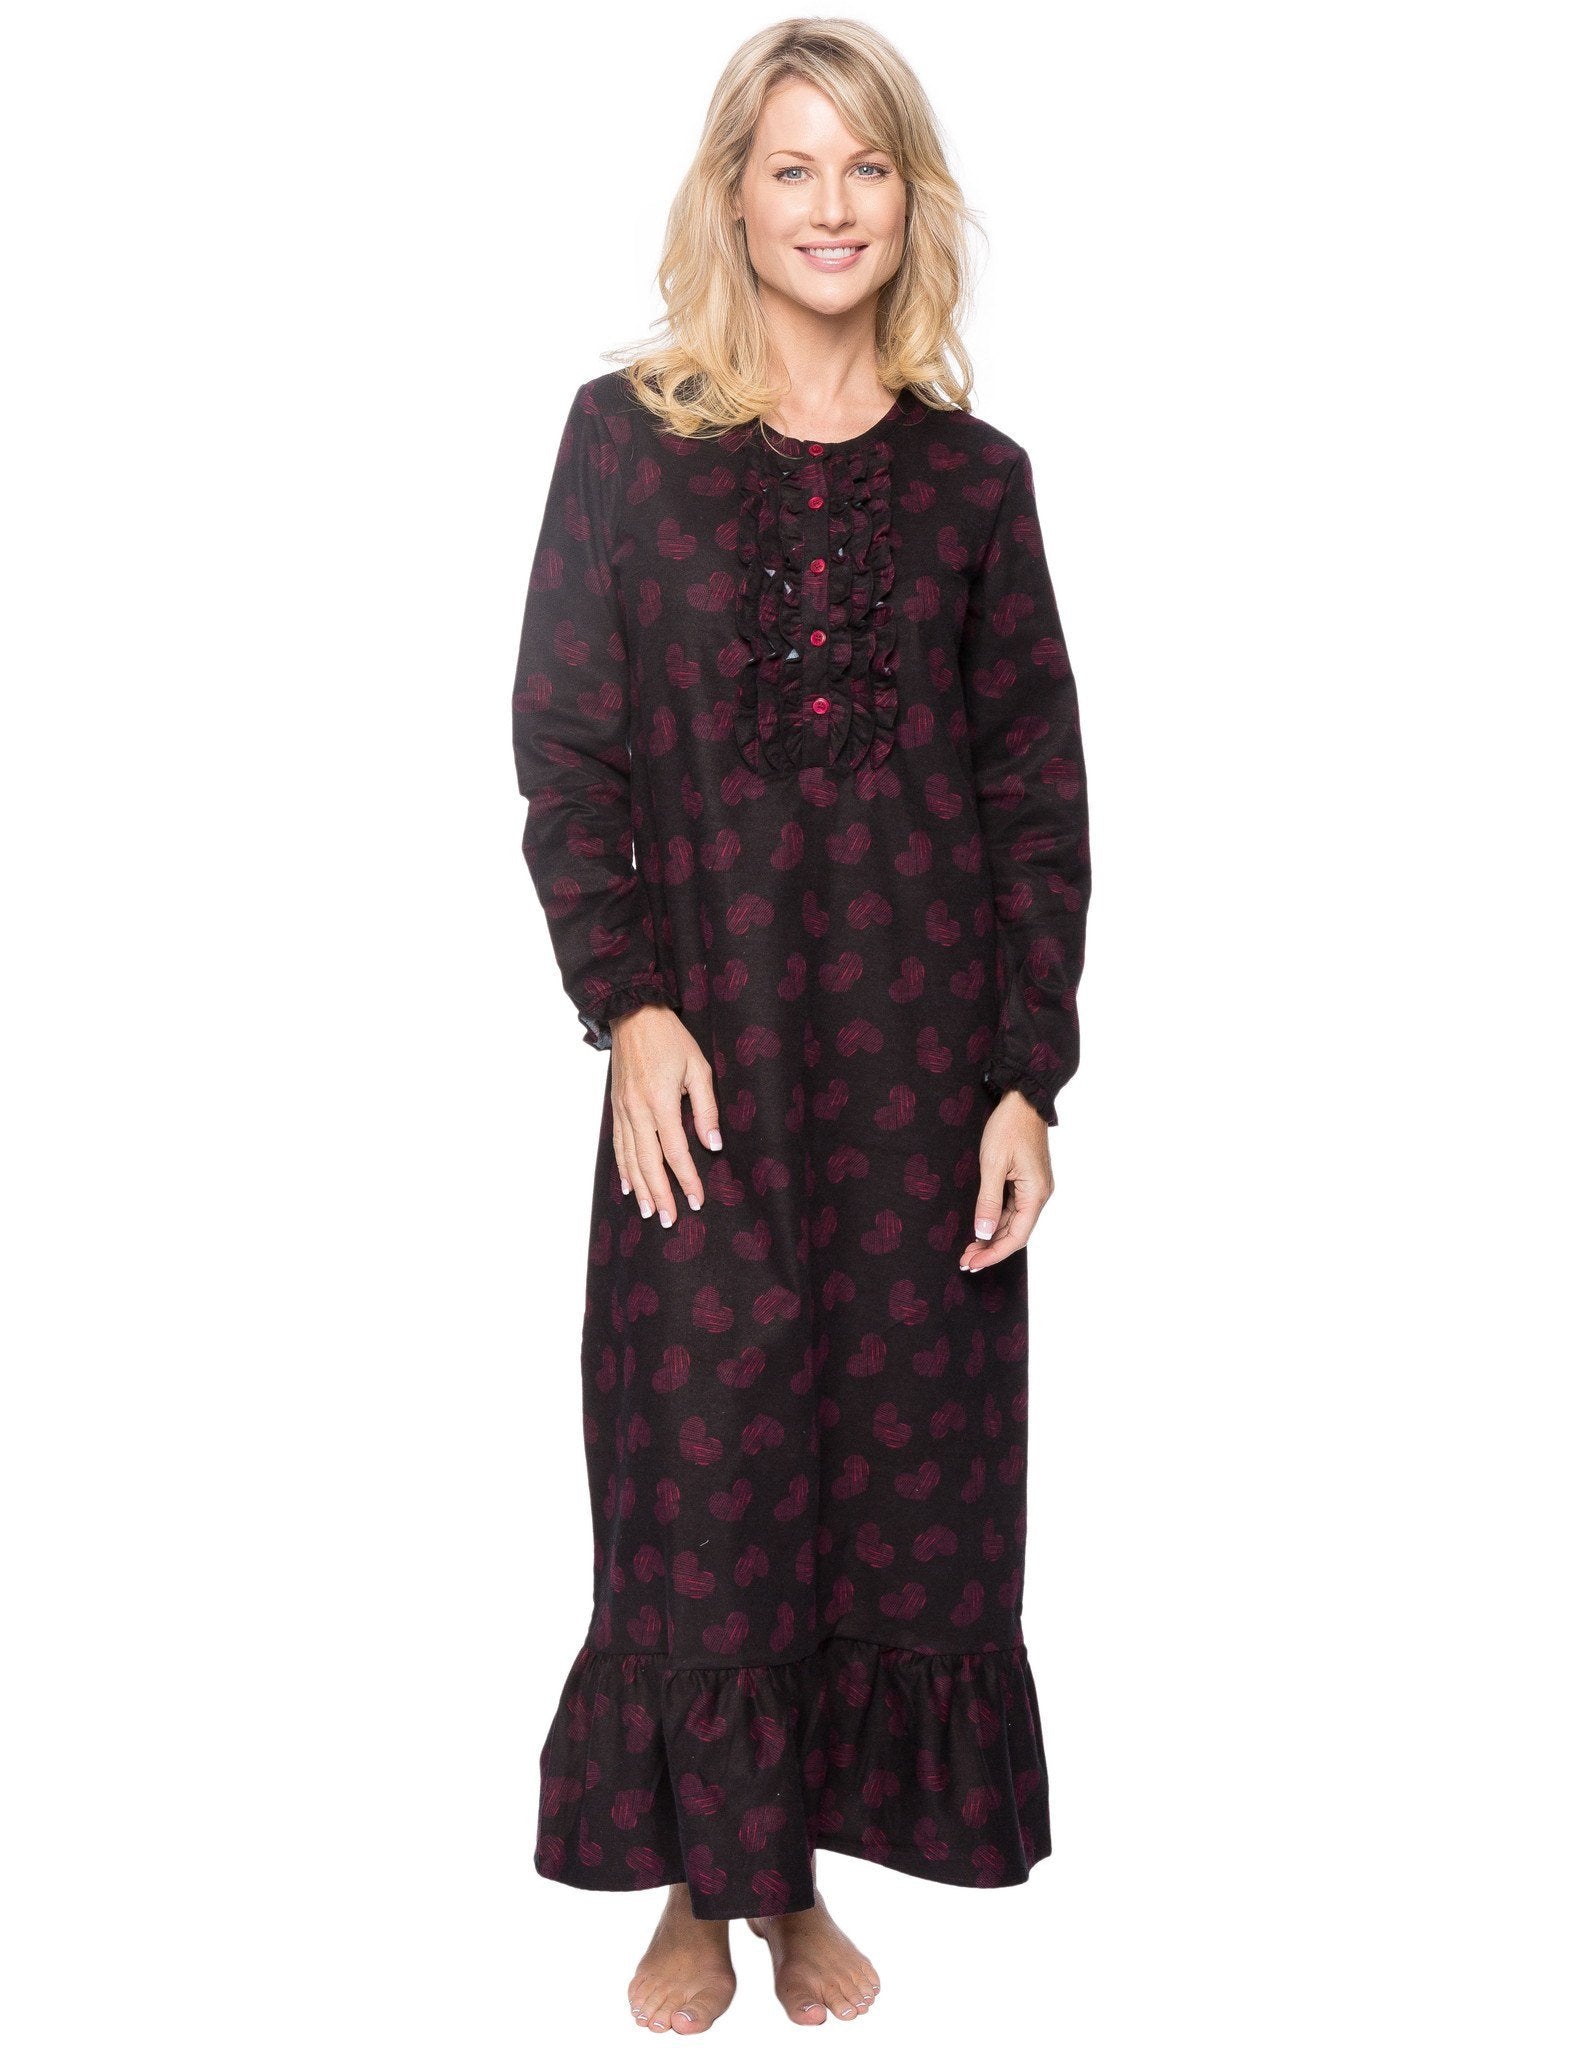 Women's Premium Flannel Long Gown - Hearts Black/Red